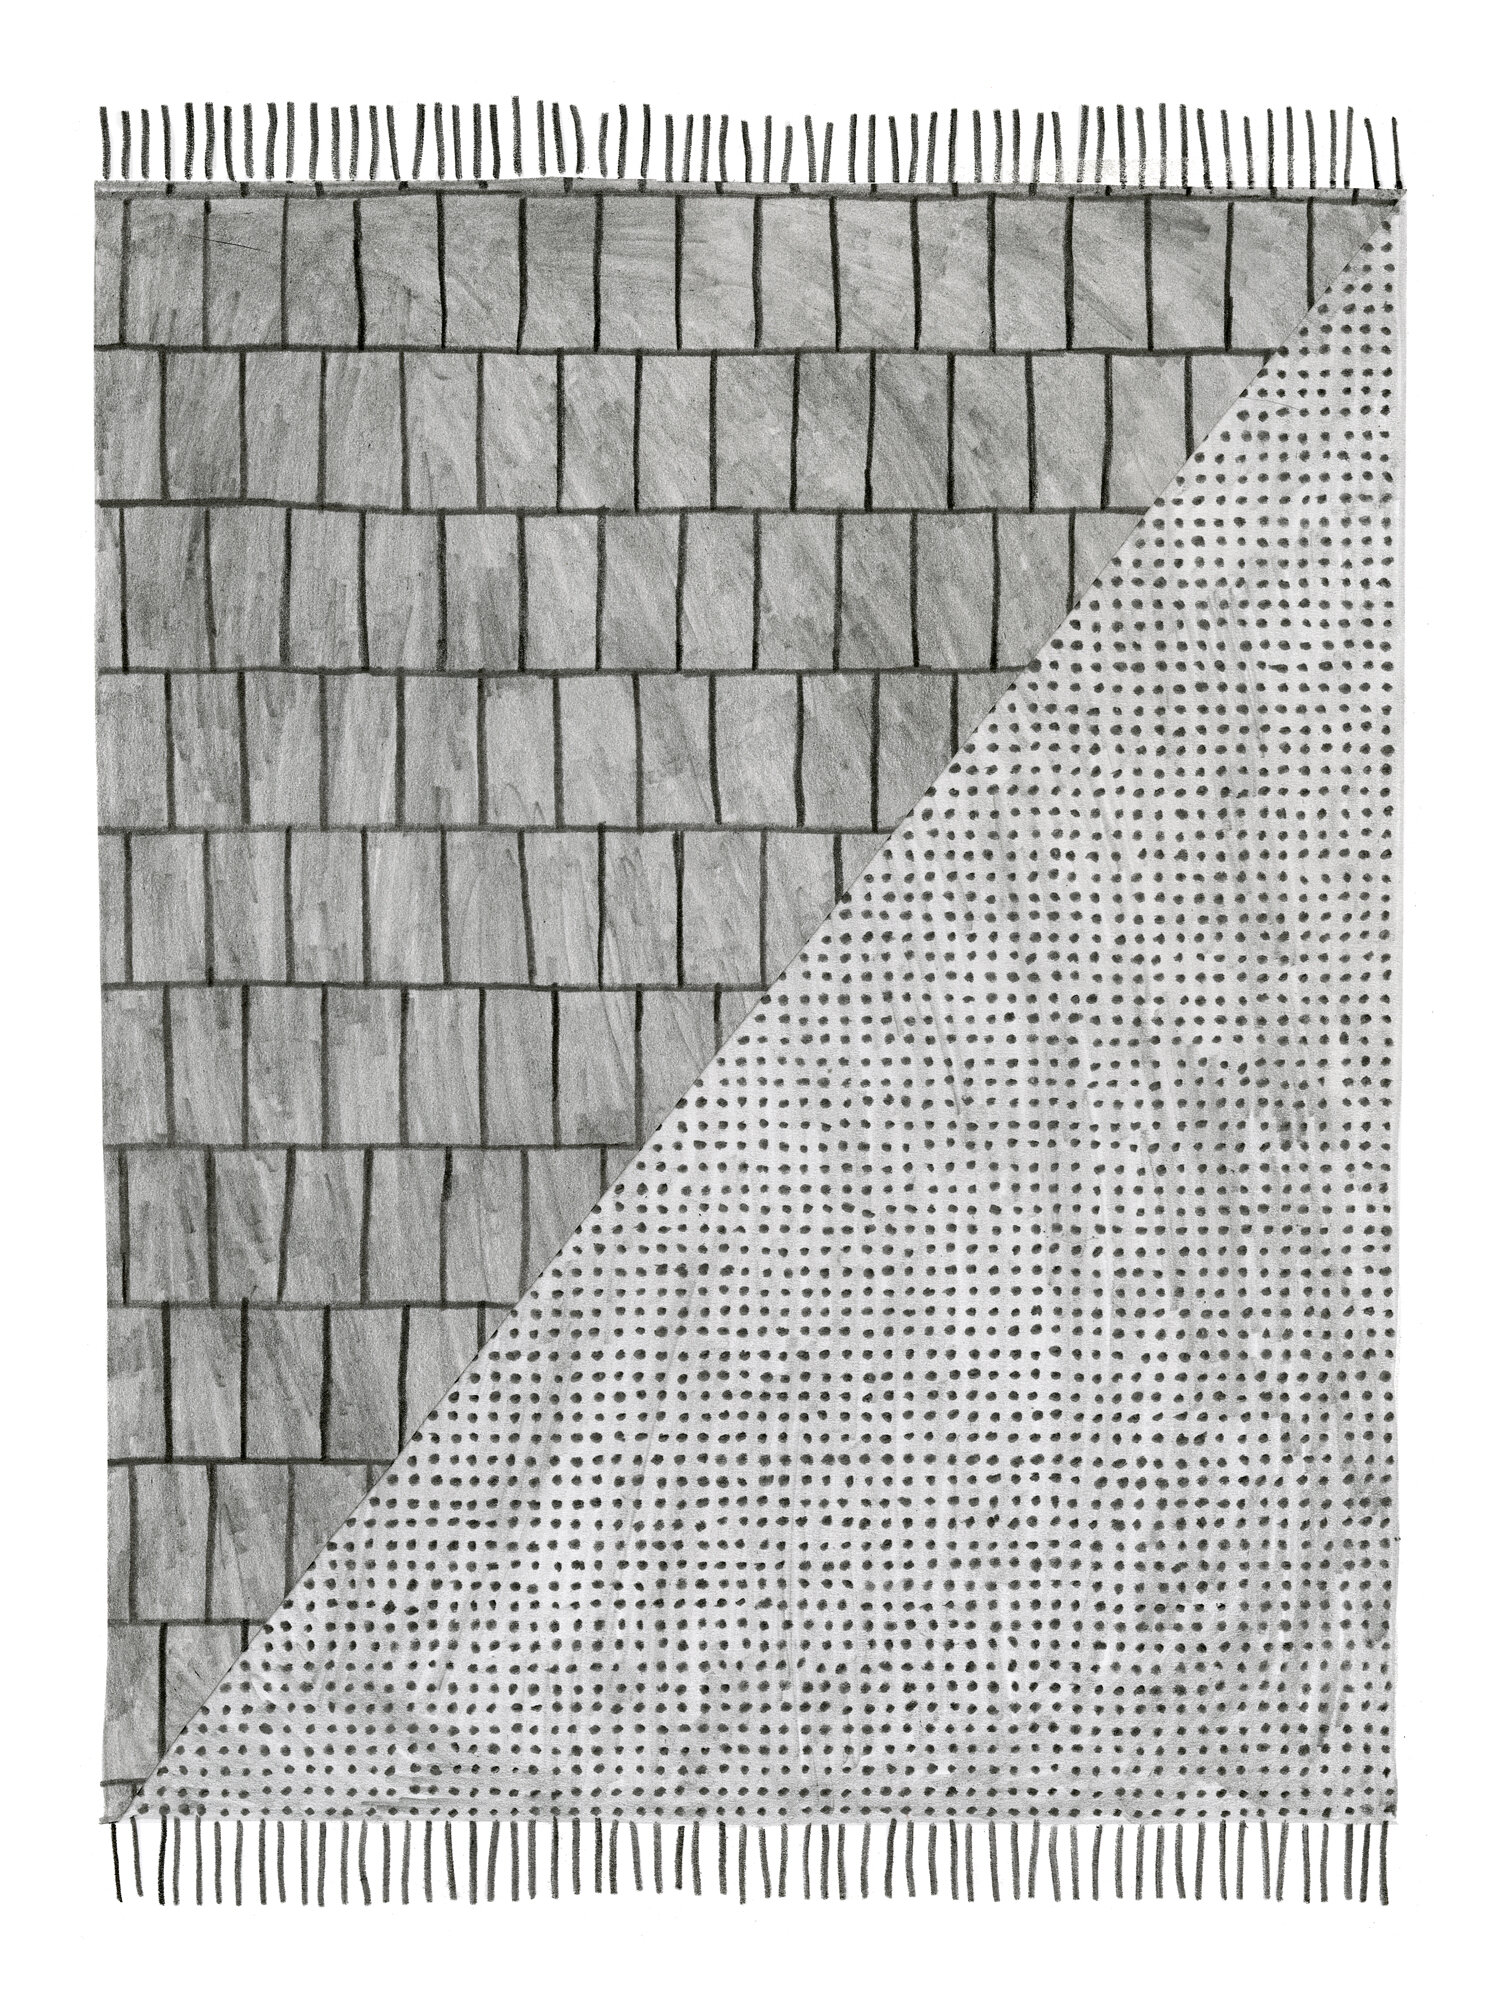   Bricks &amp; Dots Rug   Pencil on paper 12 x 9 inches    